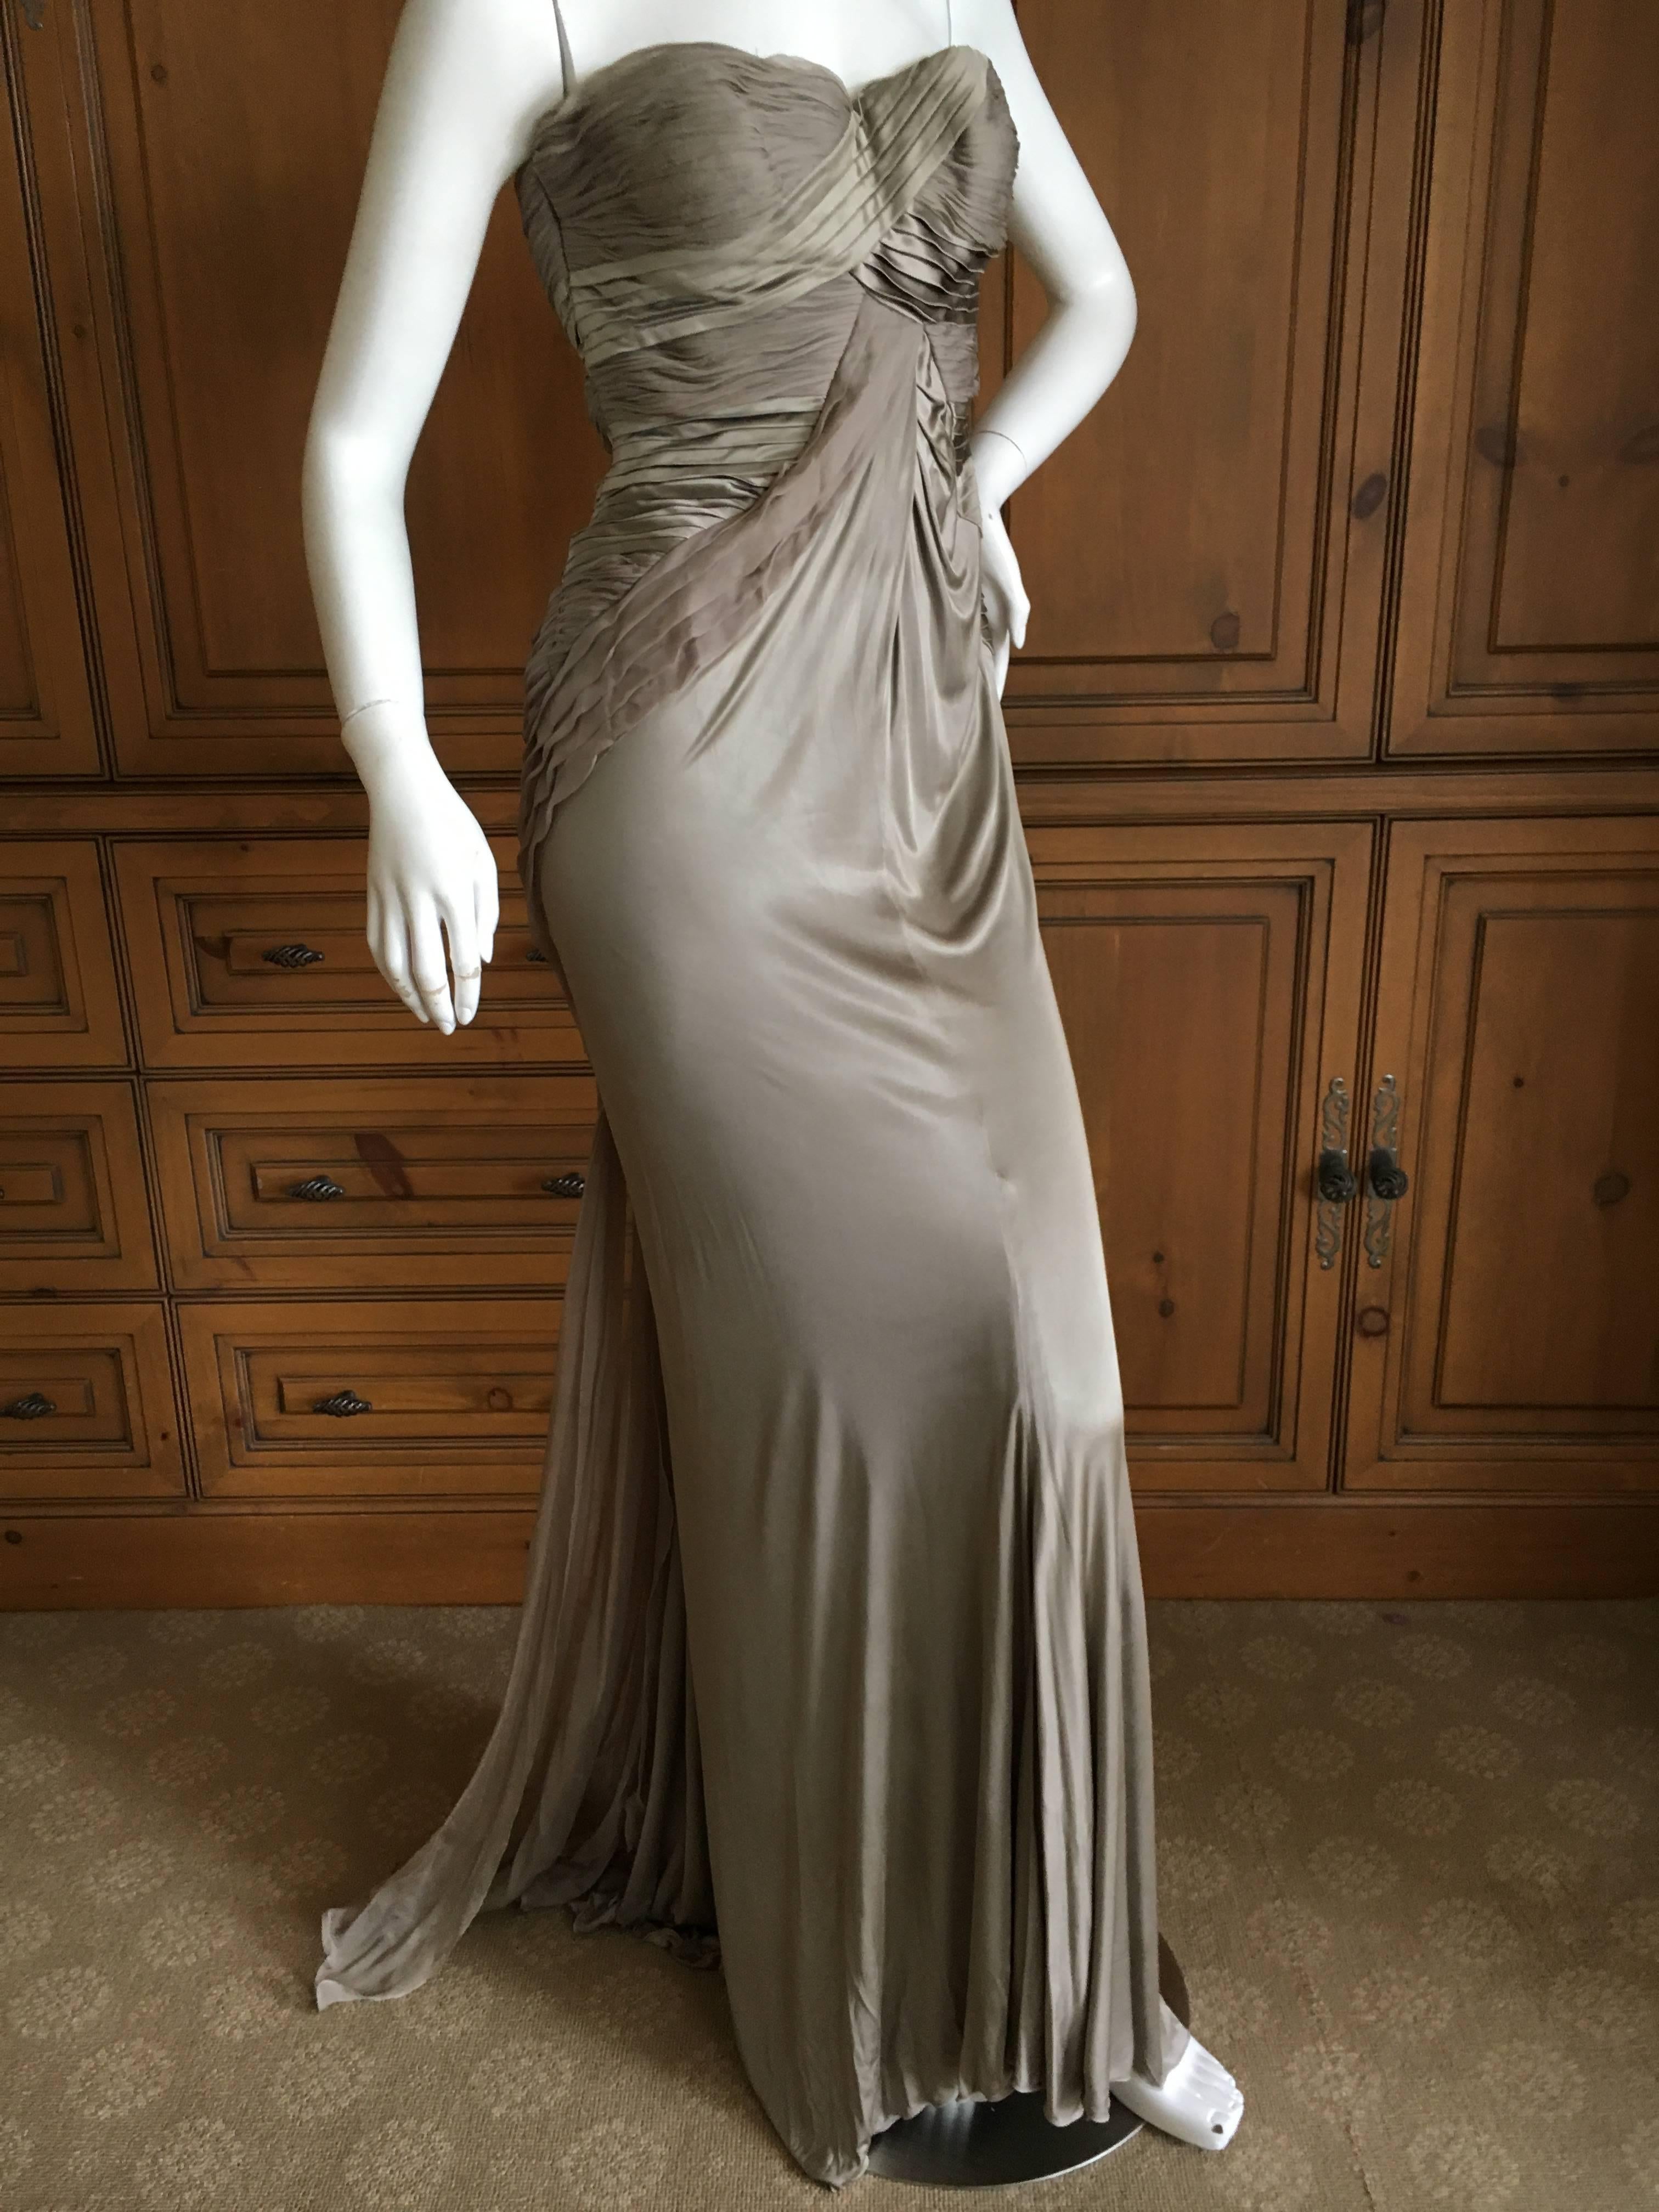 Versace Vintage Pleated Strapless Evening Dress.
Size 40
Bust 36